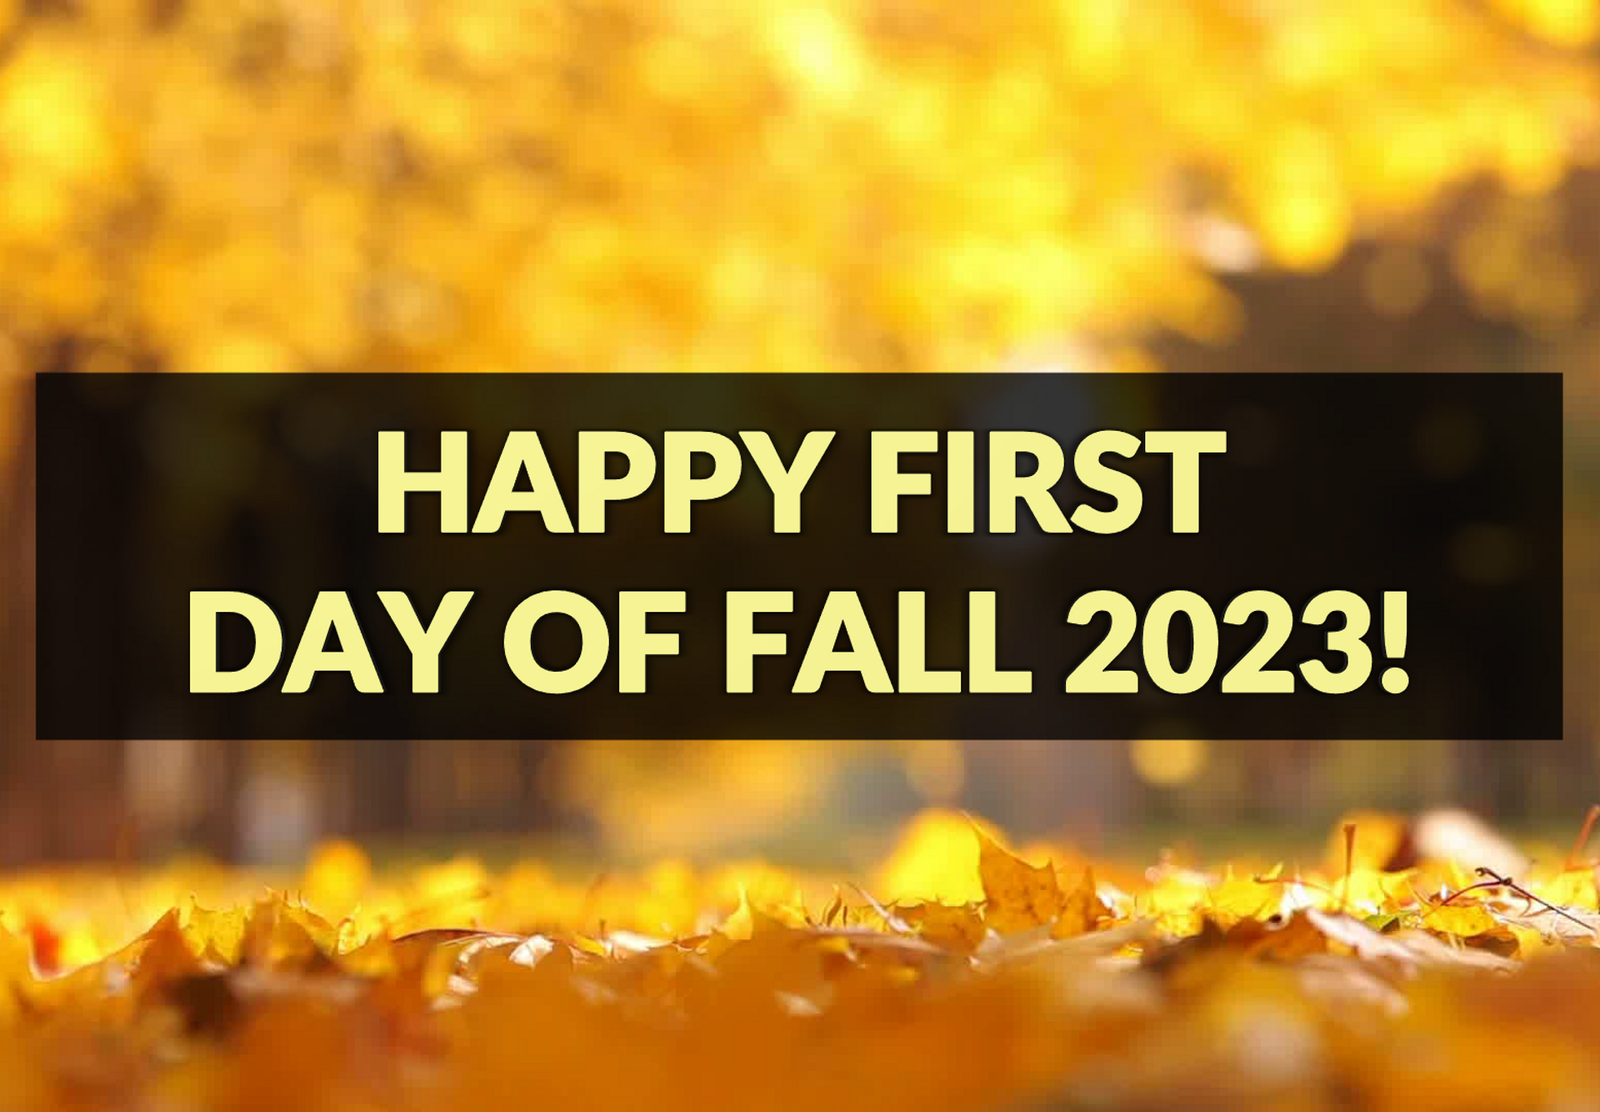 First Day of Fall 2023